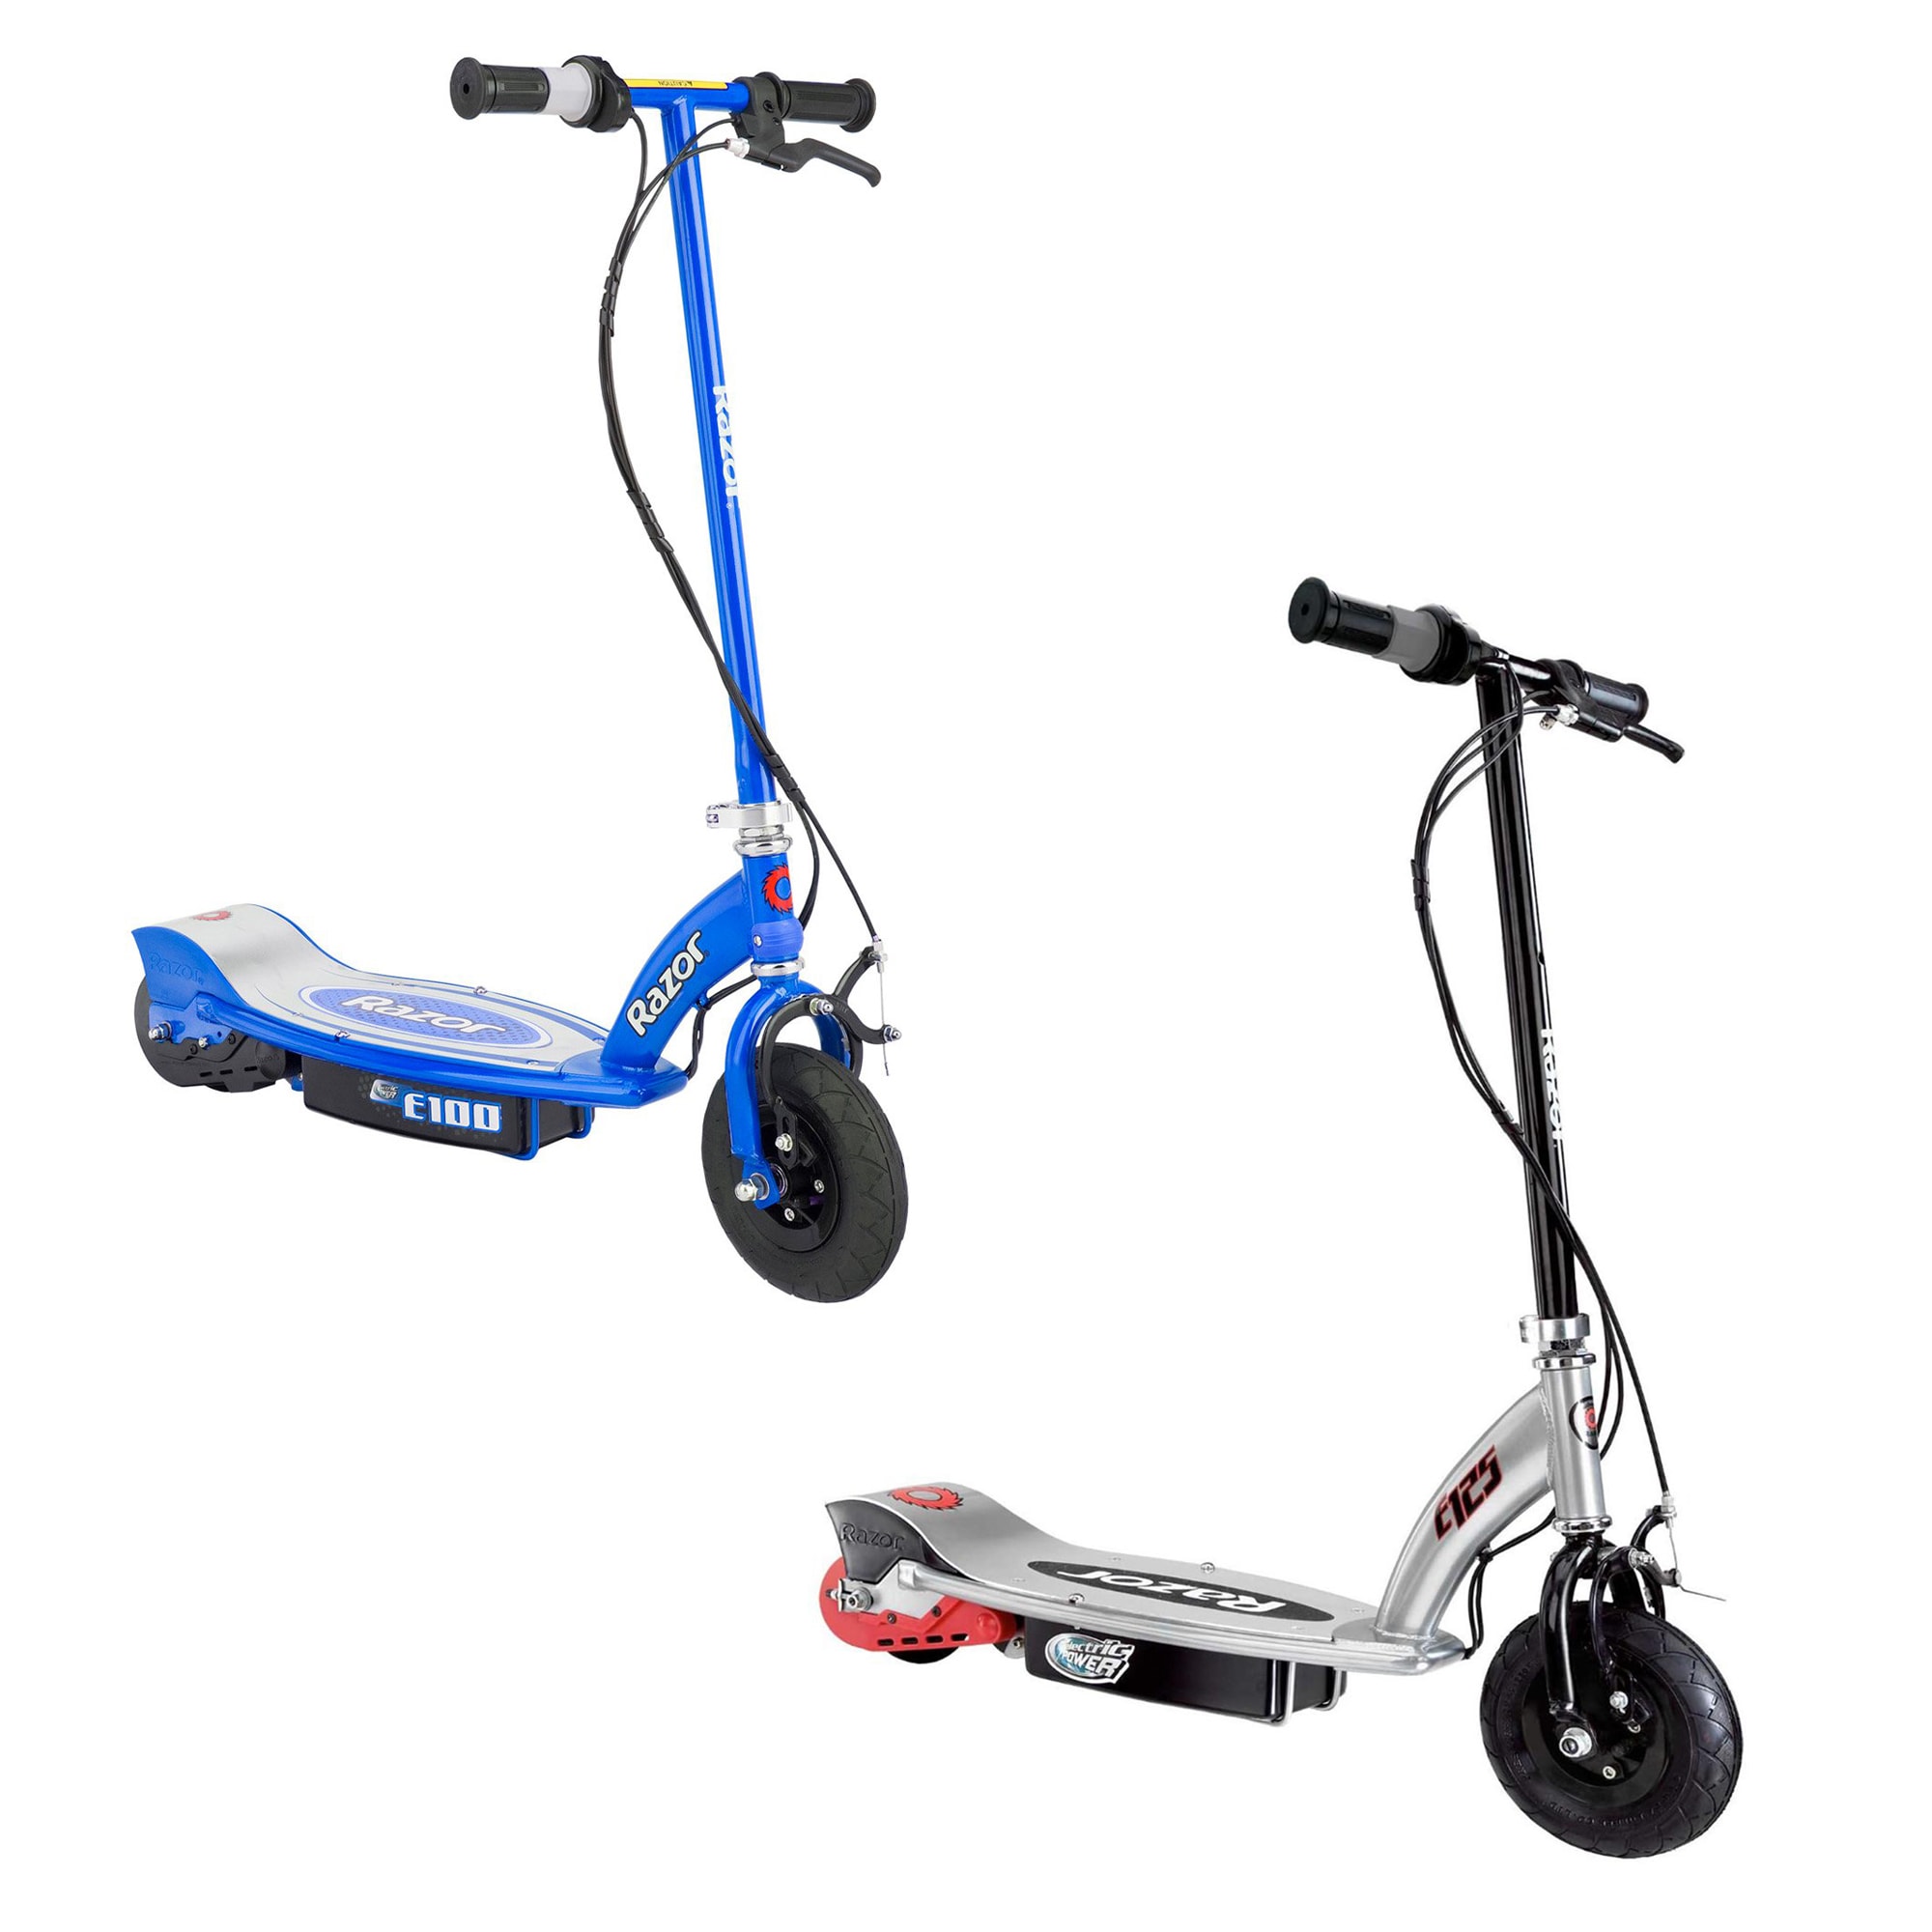 Scooter Freestyle children's scooter blue black 